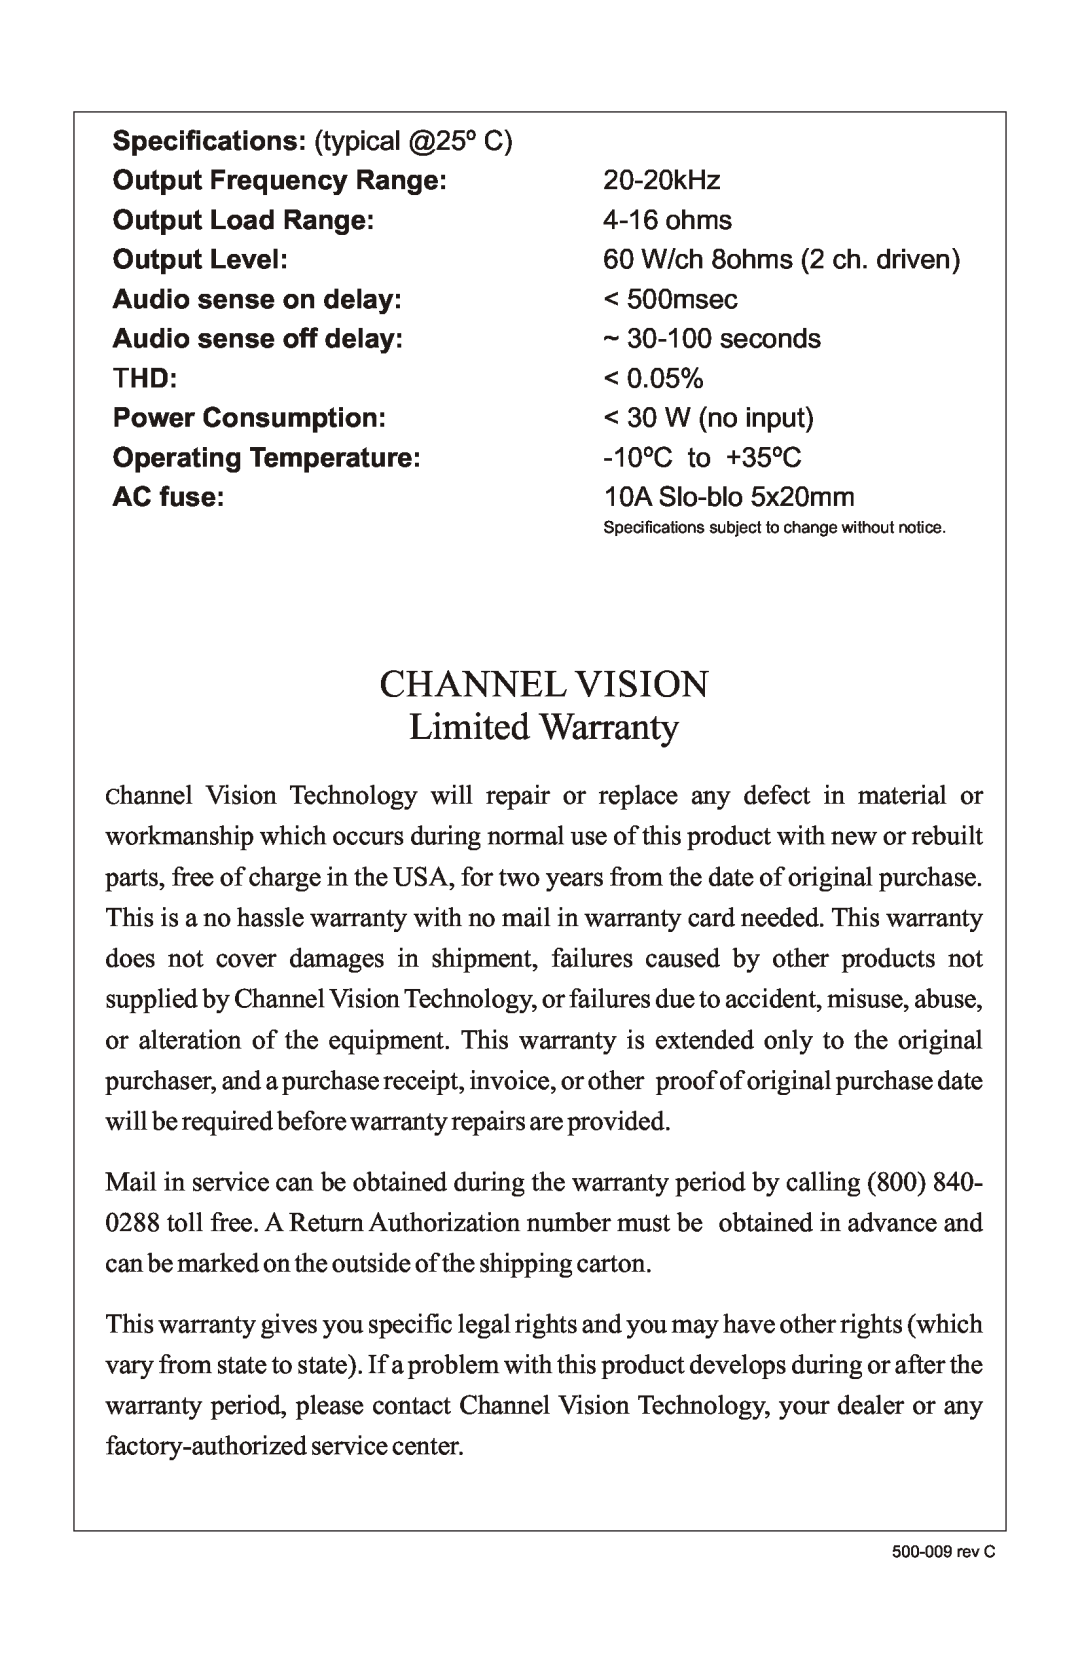 Channel Vision A1260R manual CHANNEL VISION Limited Warranty 